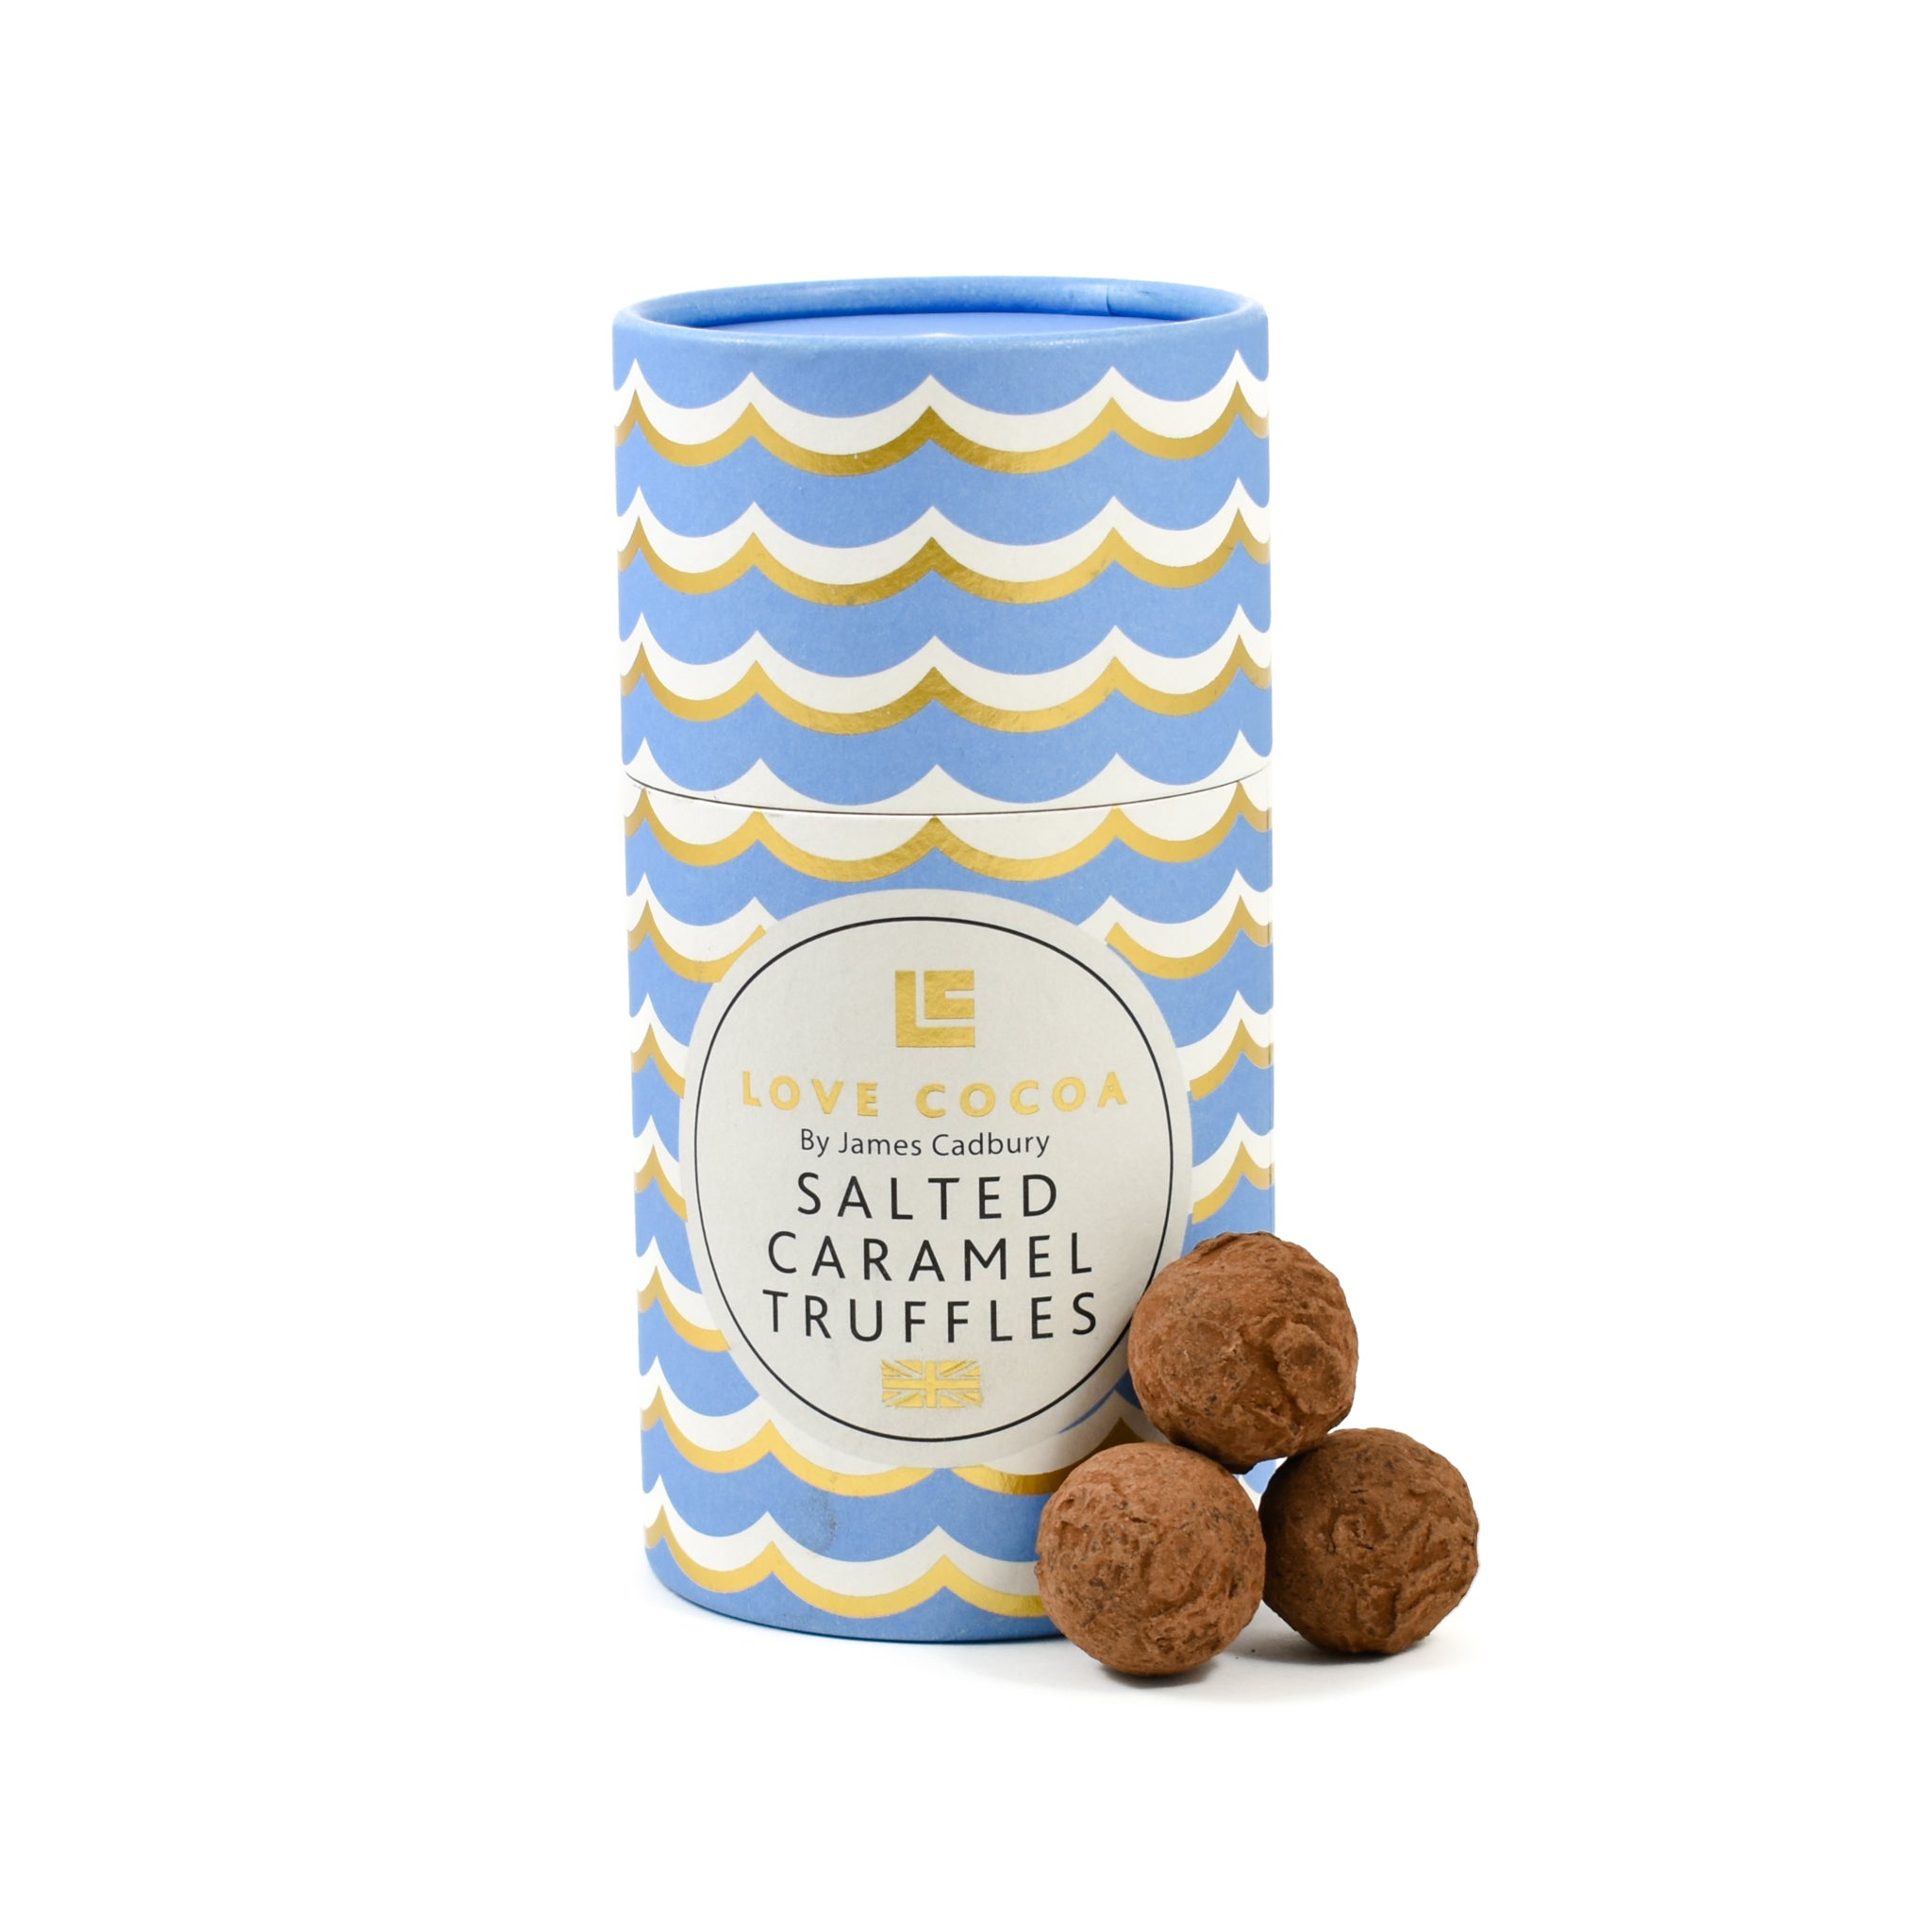 Love Cocoa Salted Caramel Truffles Luxury Gift Box 150g Ingredients Chocolate Bars & Confectionery